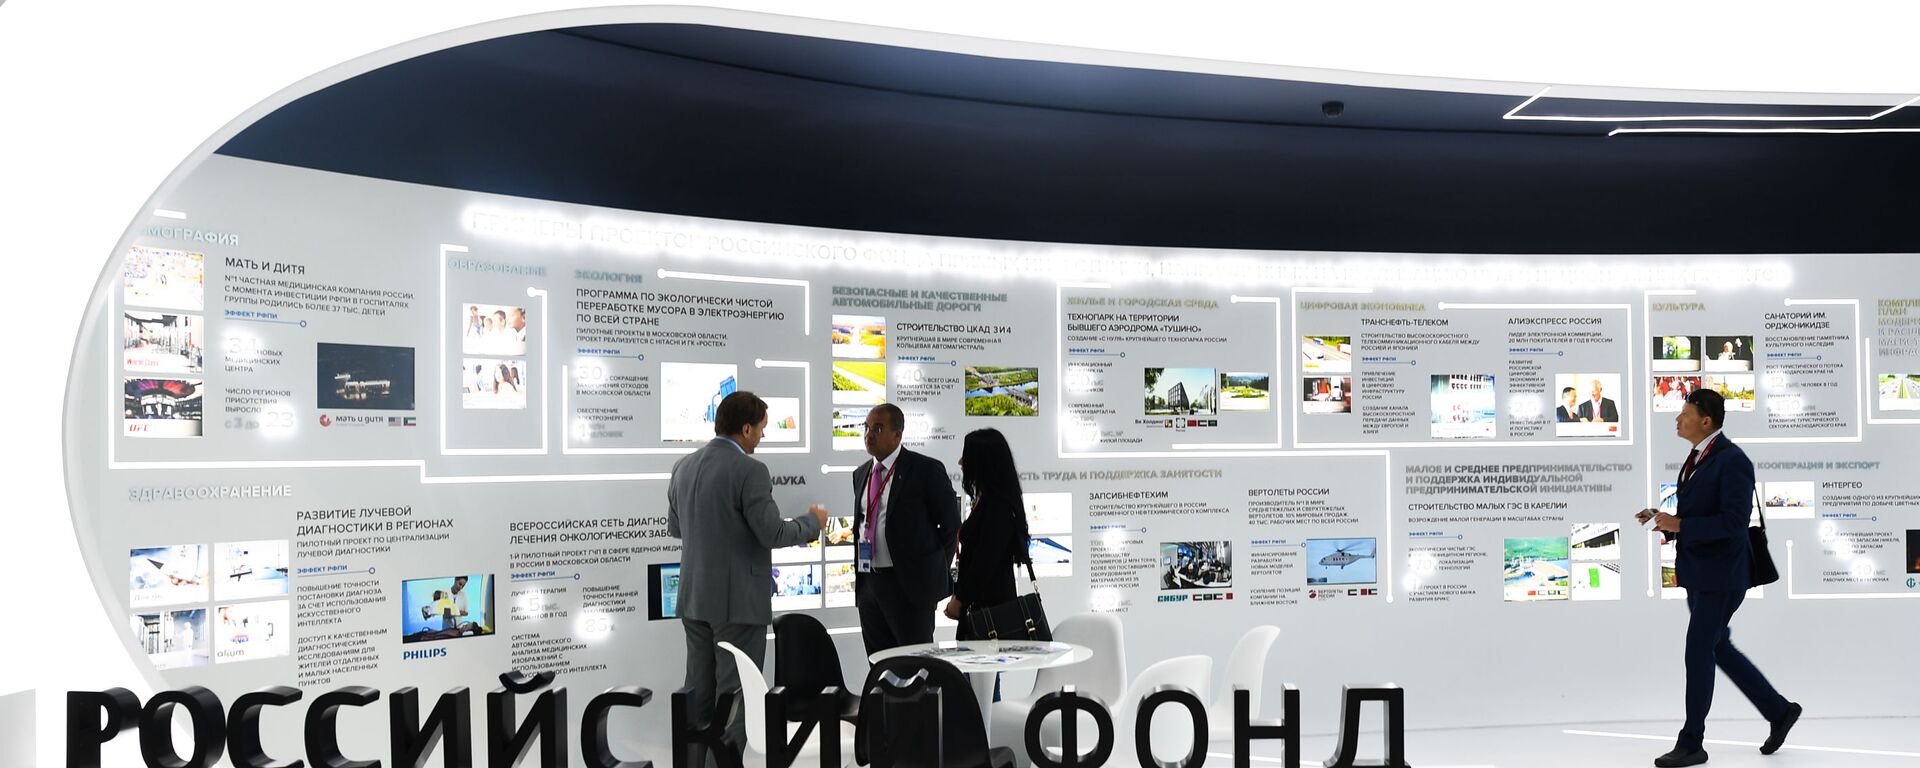 People visit the stand of the Russian Direct Investment Fund (RDIF) during the St. Petersburg International Economic Forum (SPIEF)  - Sputnik International, 1920, 02.12.2020